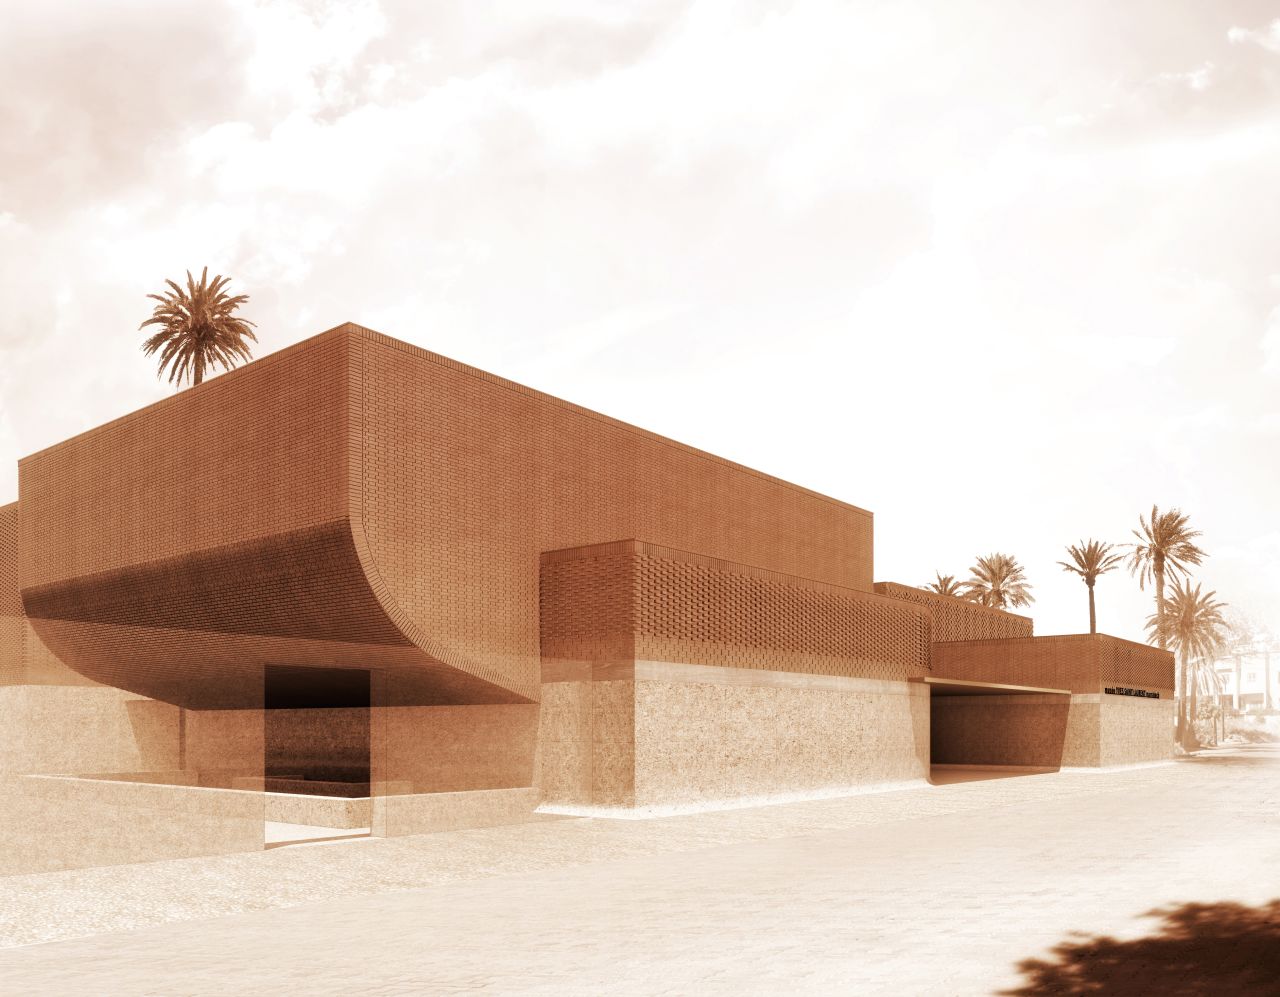 A rendering of the upcoming Musee Yves Saint Laurent Marrakech.